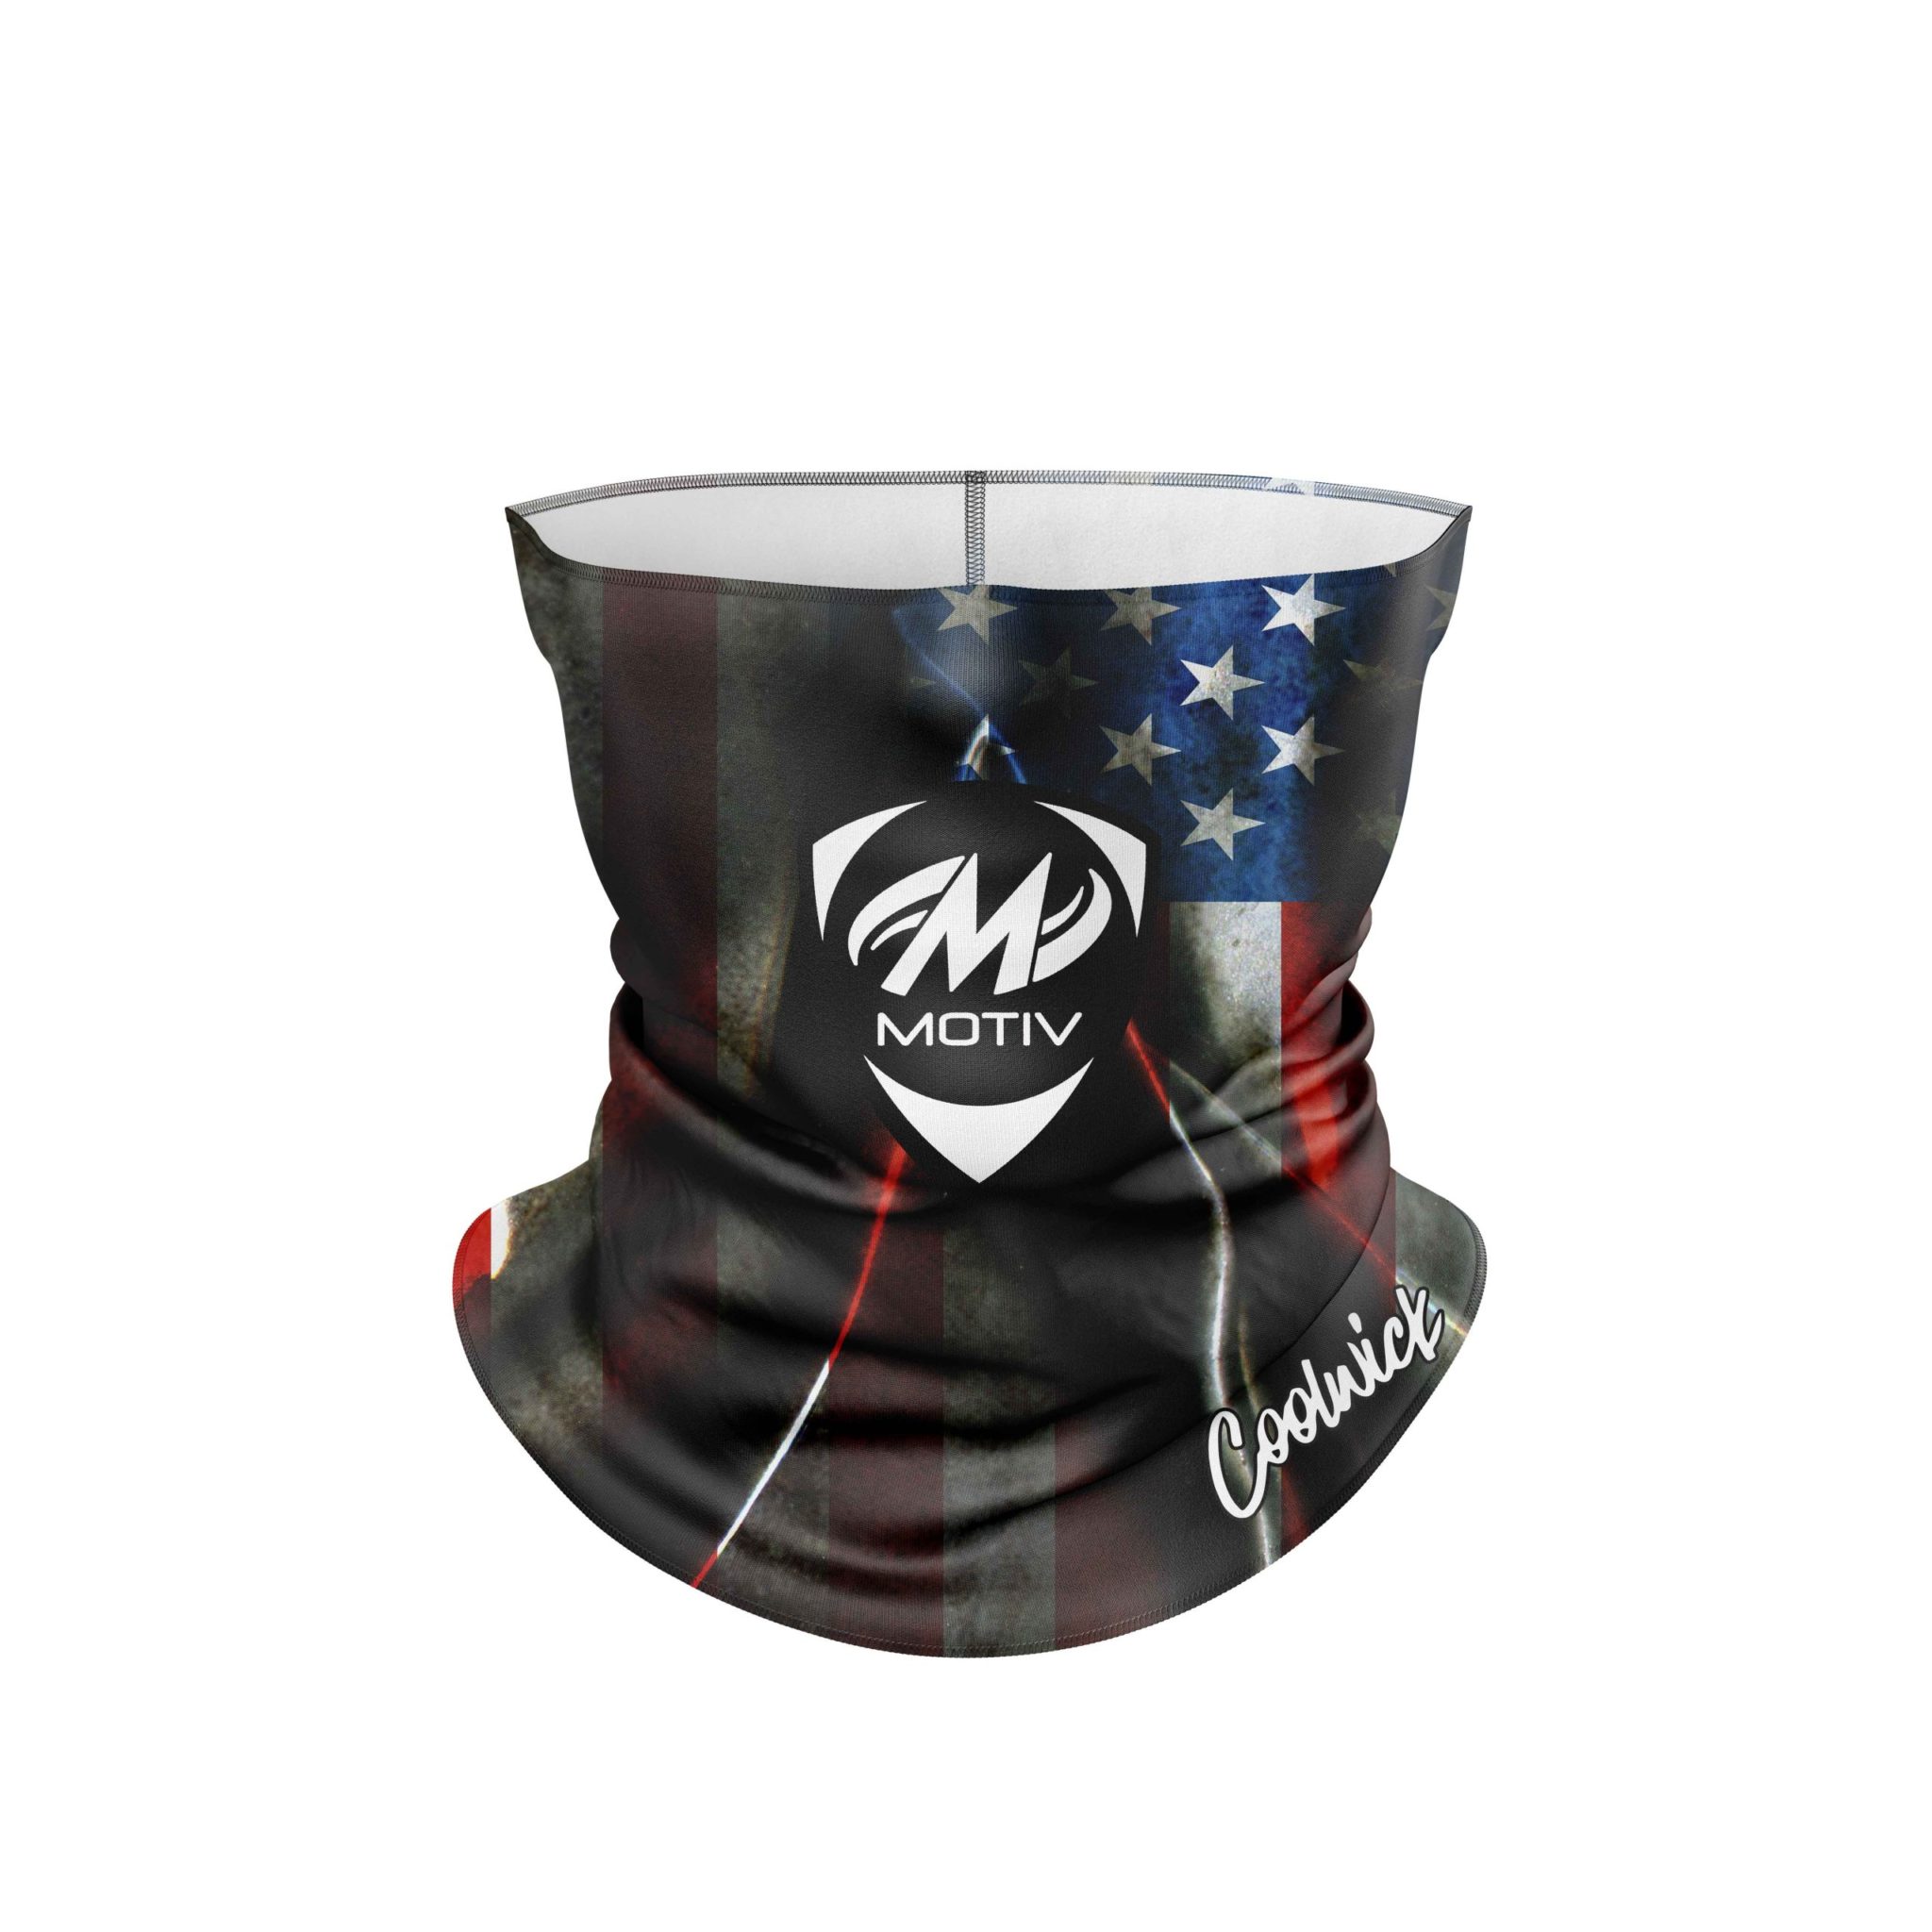 Motiv Crest Old Glory CoolWick Head Gear Mask All-In-1